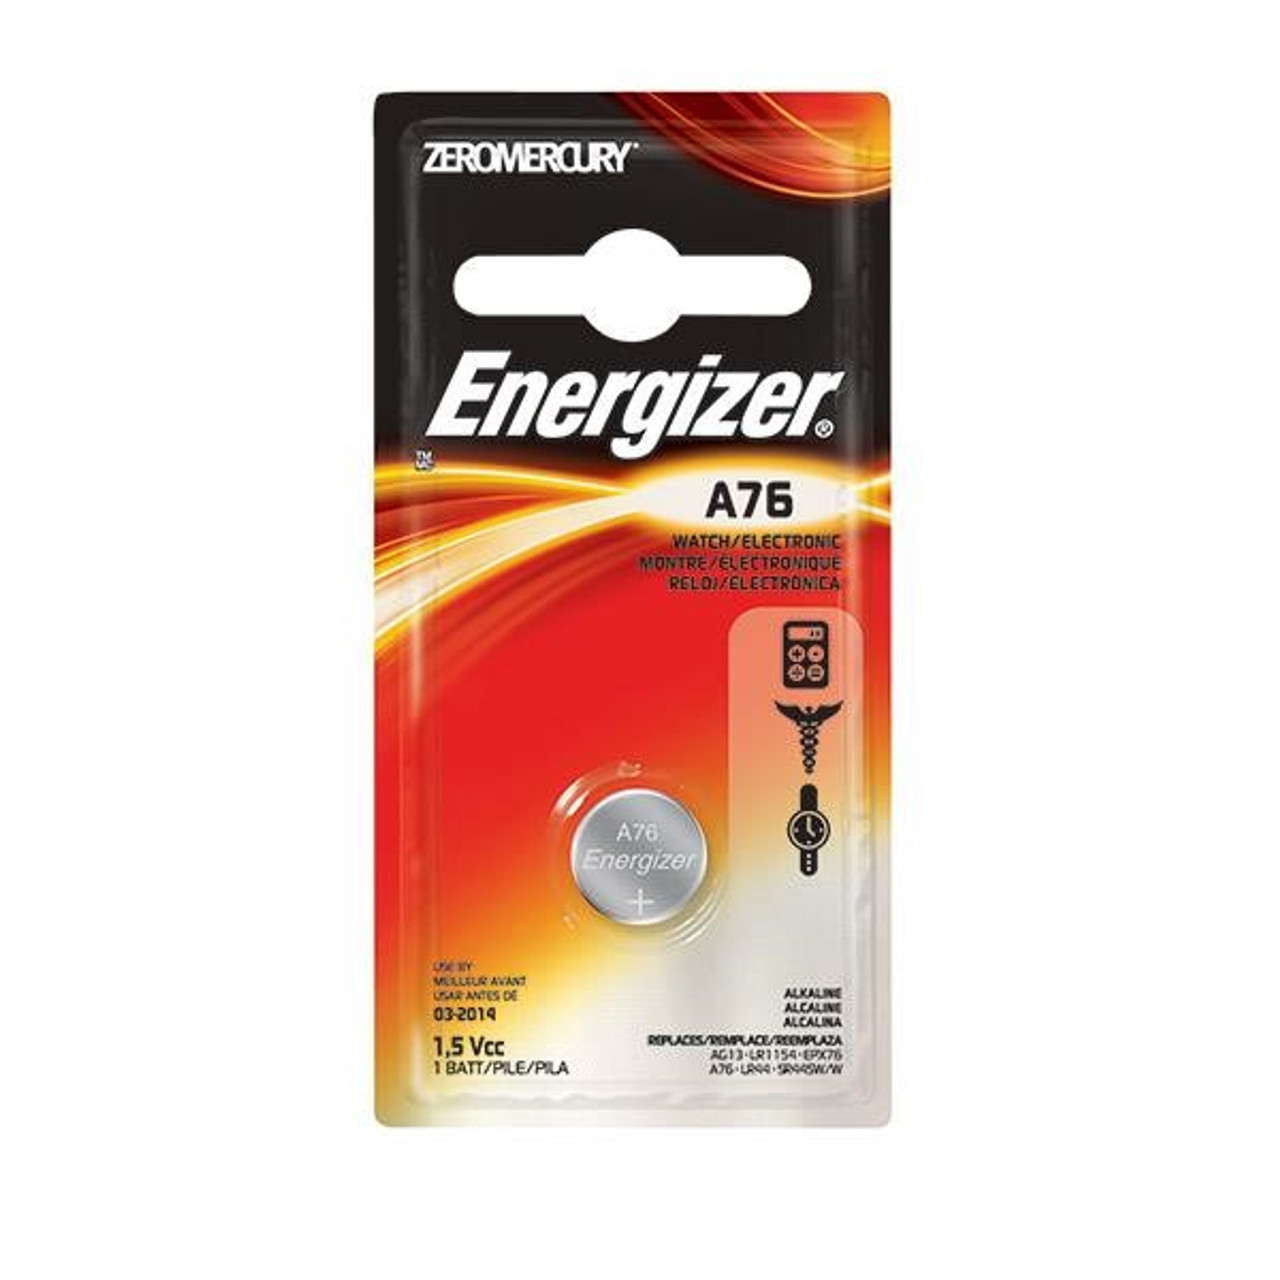 2 Energizer CR1620 Lithium 3V Coin Cell Batteries